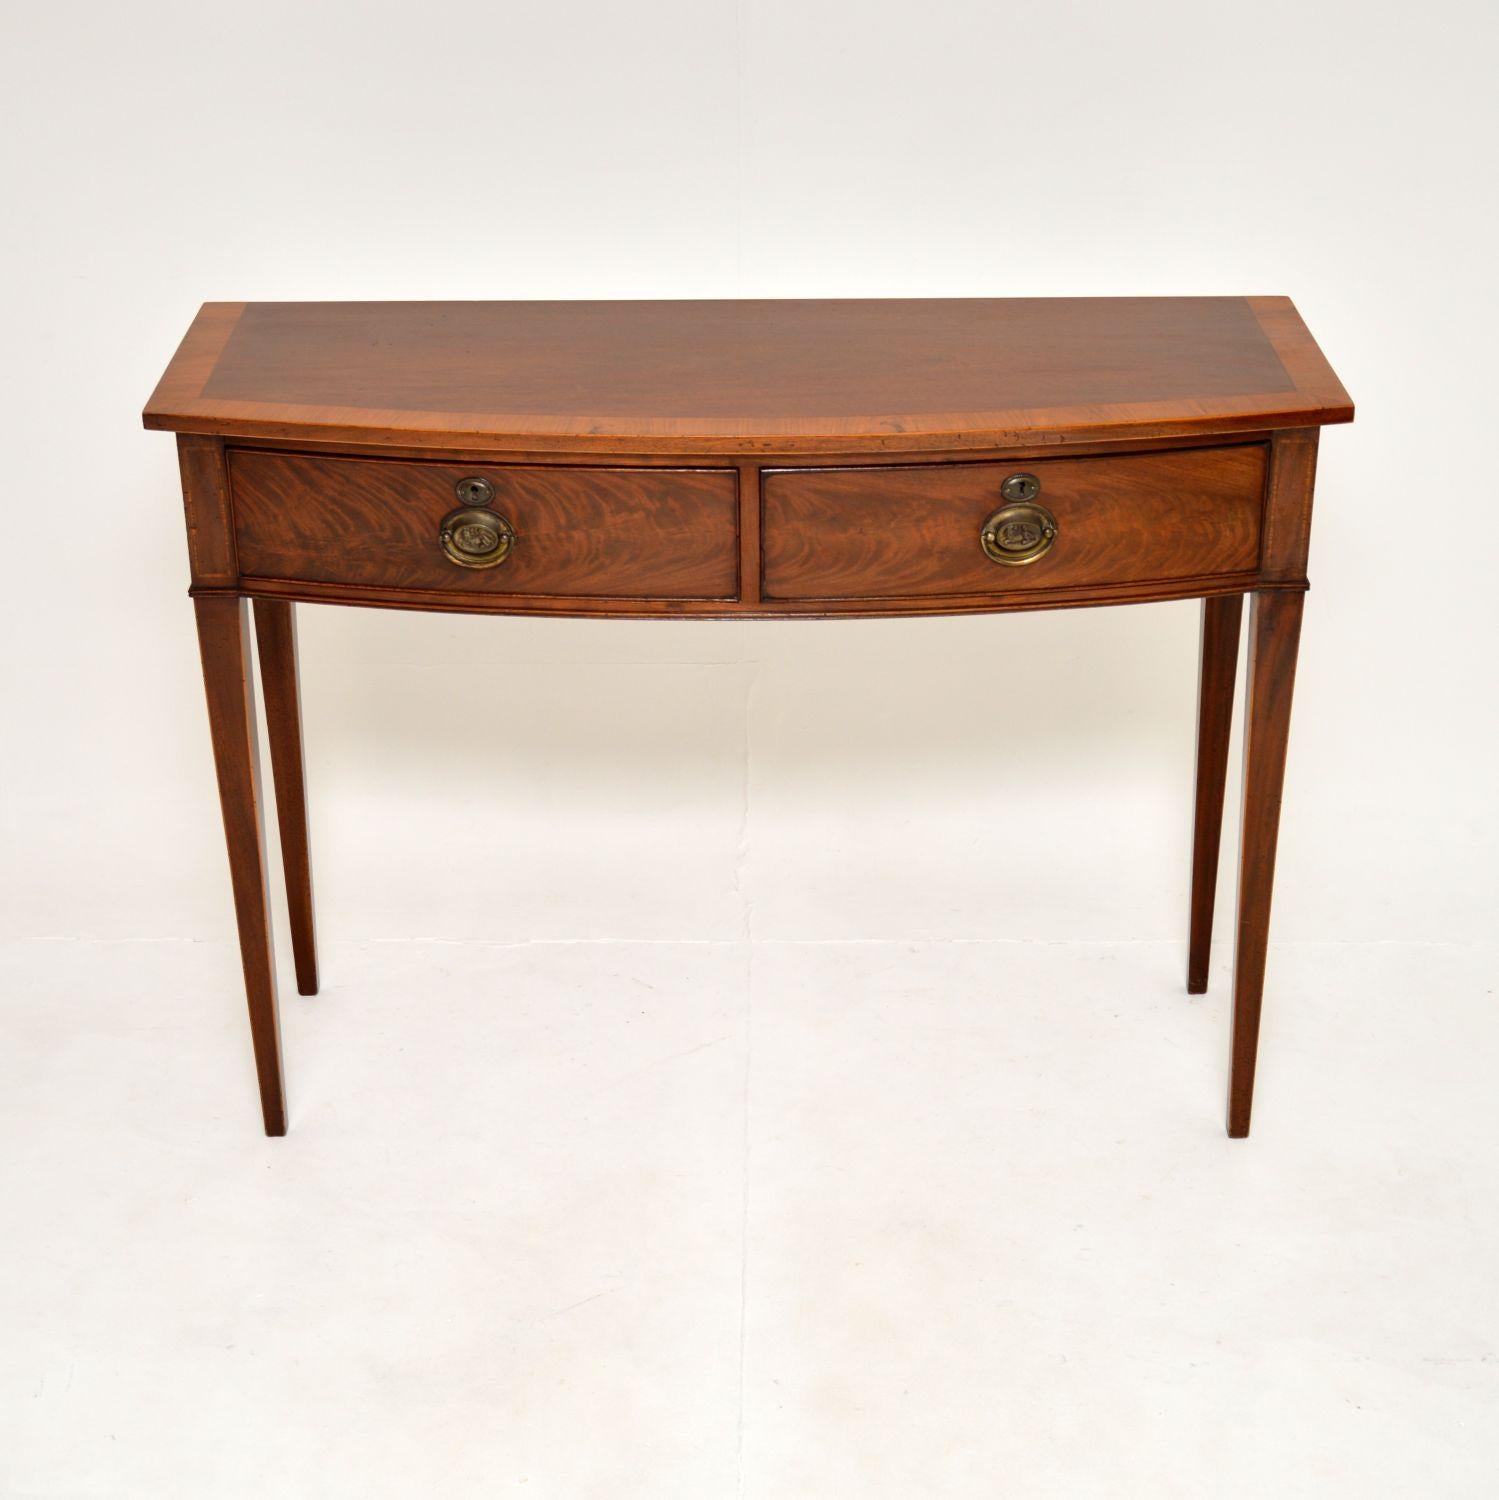 A superb antique Georgian inlaid console table. This was made in England, it dates from the 1820-40’s period.

It is of amazing quality and is an impressive size. This has a bow fronted design, the two drawers are deep and generous, with fine hand